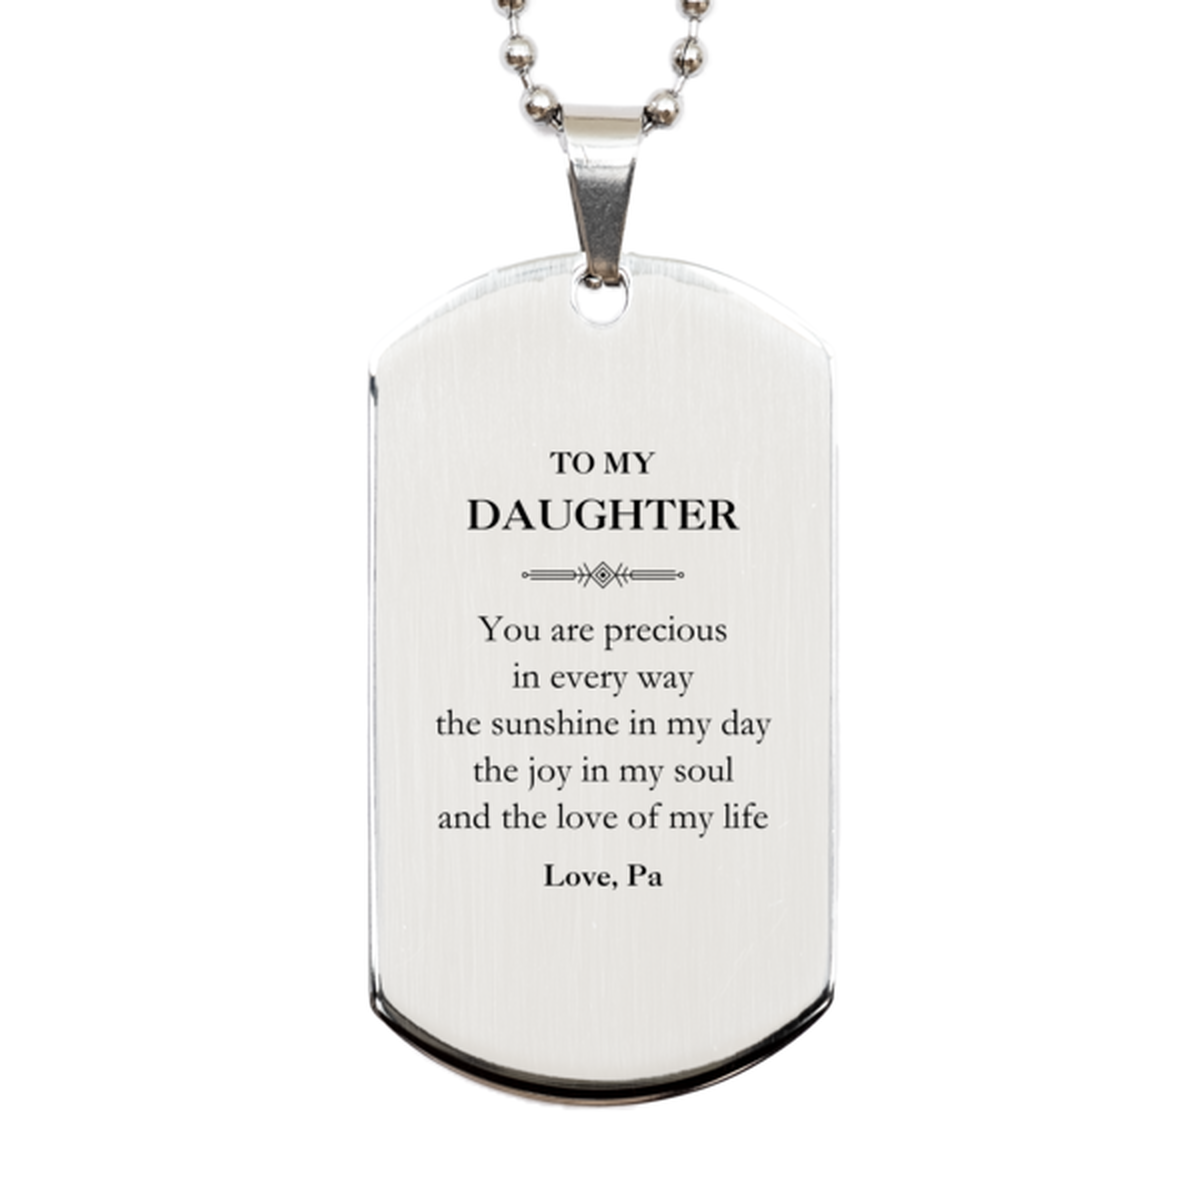 Graduation Gifts for Daughter Silver Dog Tag Present from Pa, Christmas Daughter Birthday Gifts Daughter You are precious in every way the sunshine in my day. Love, Pa